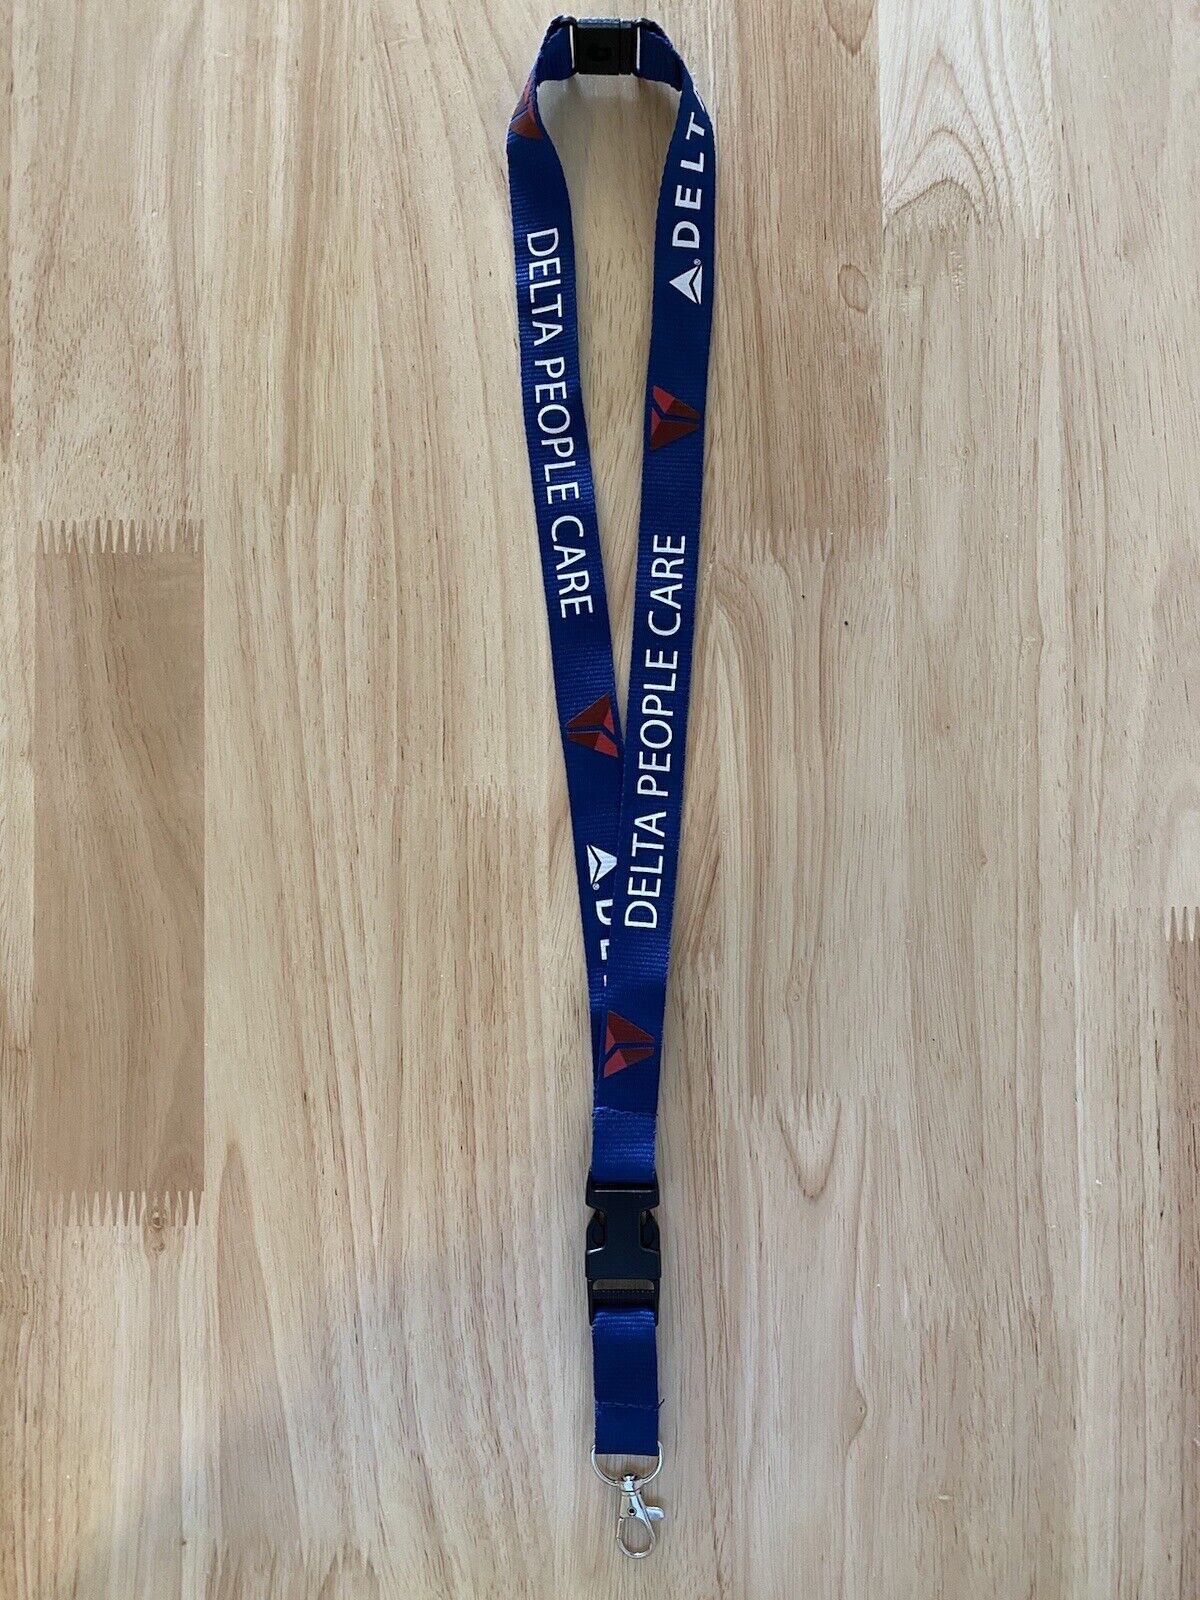 Delta Airlines “Delta People Care” Lanyard